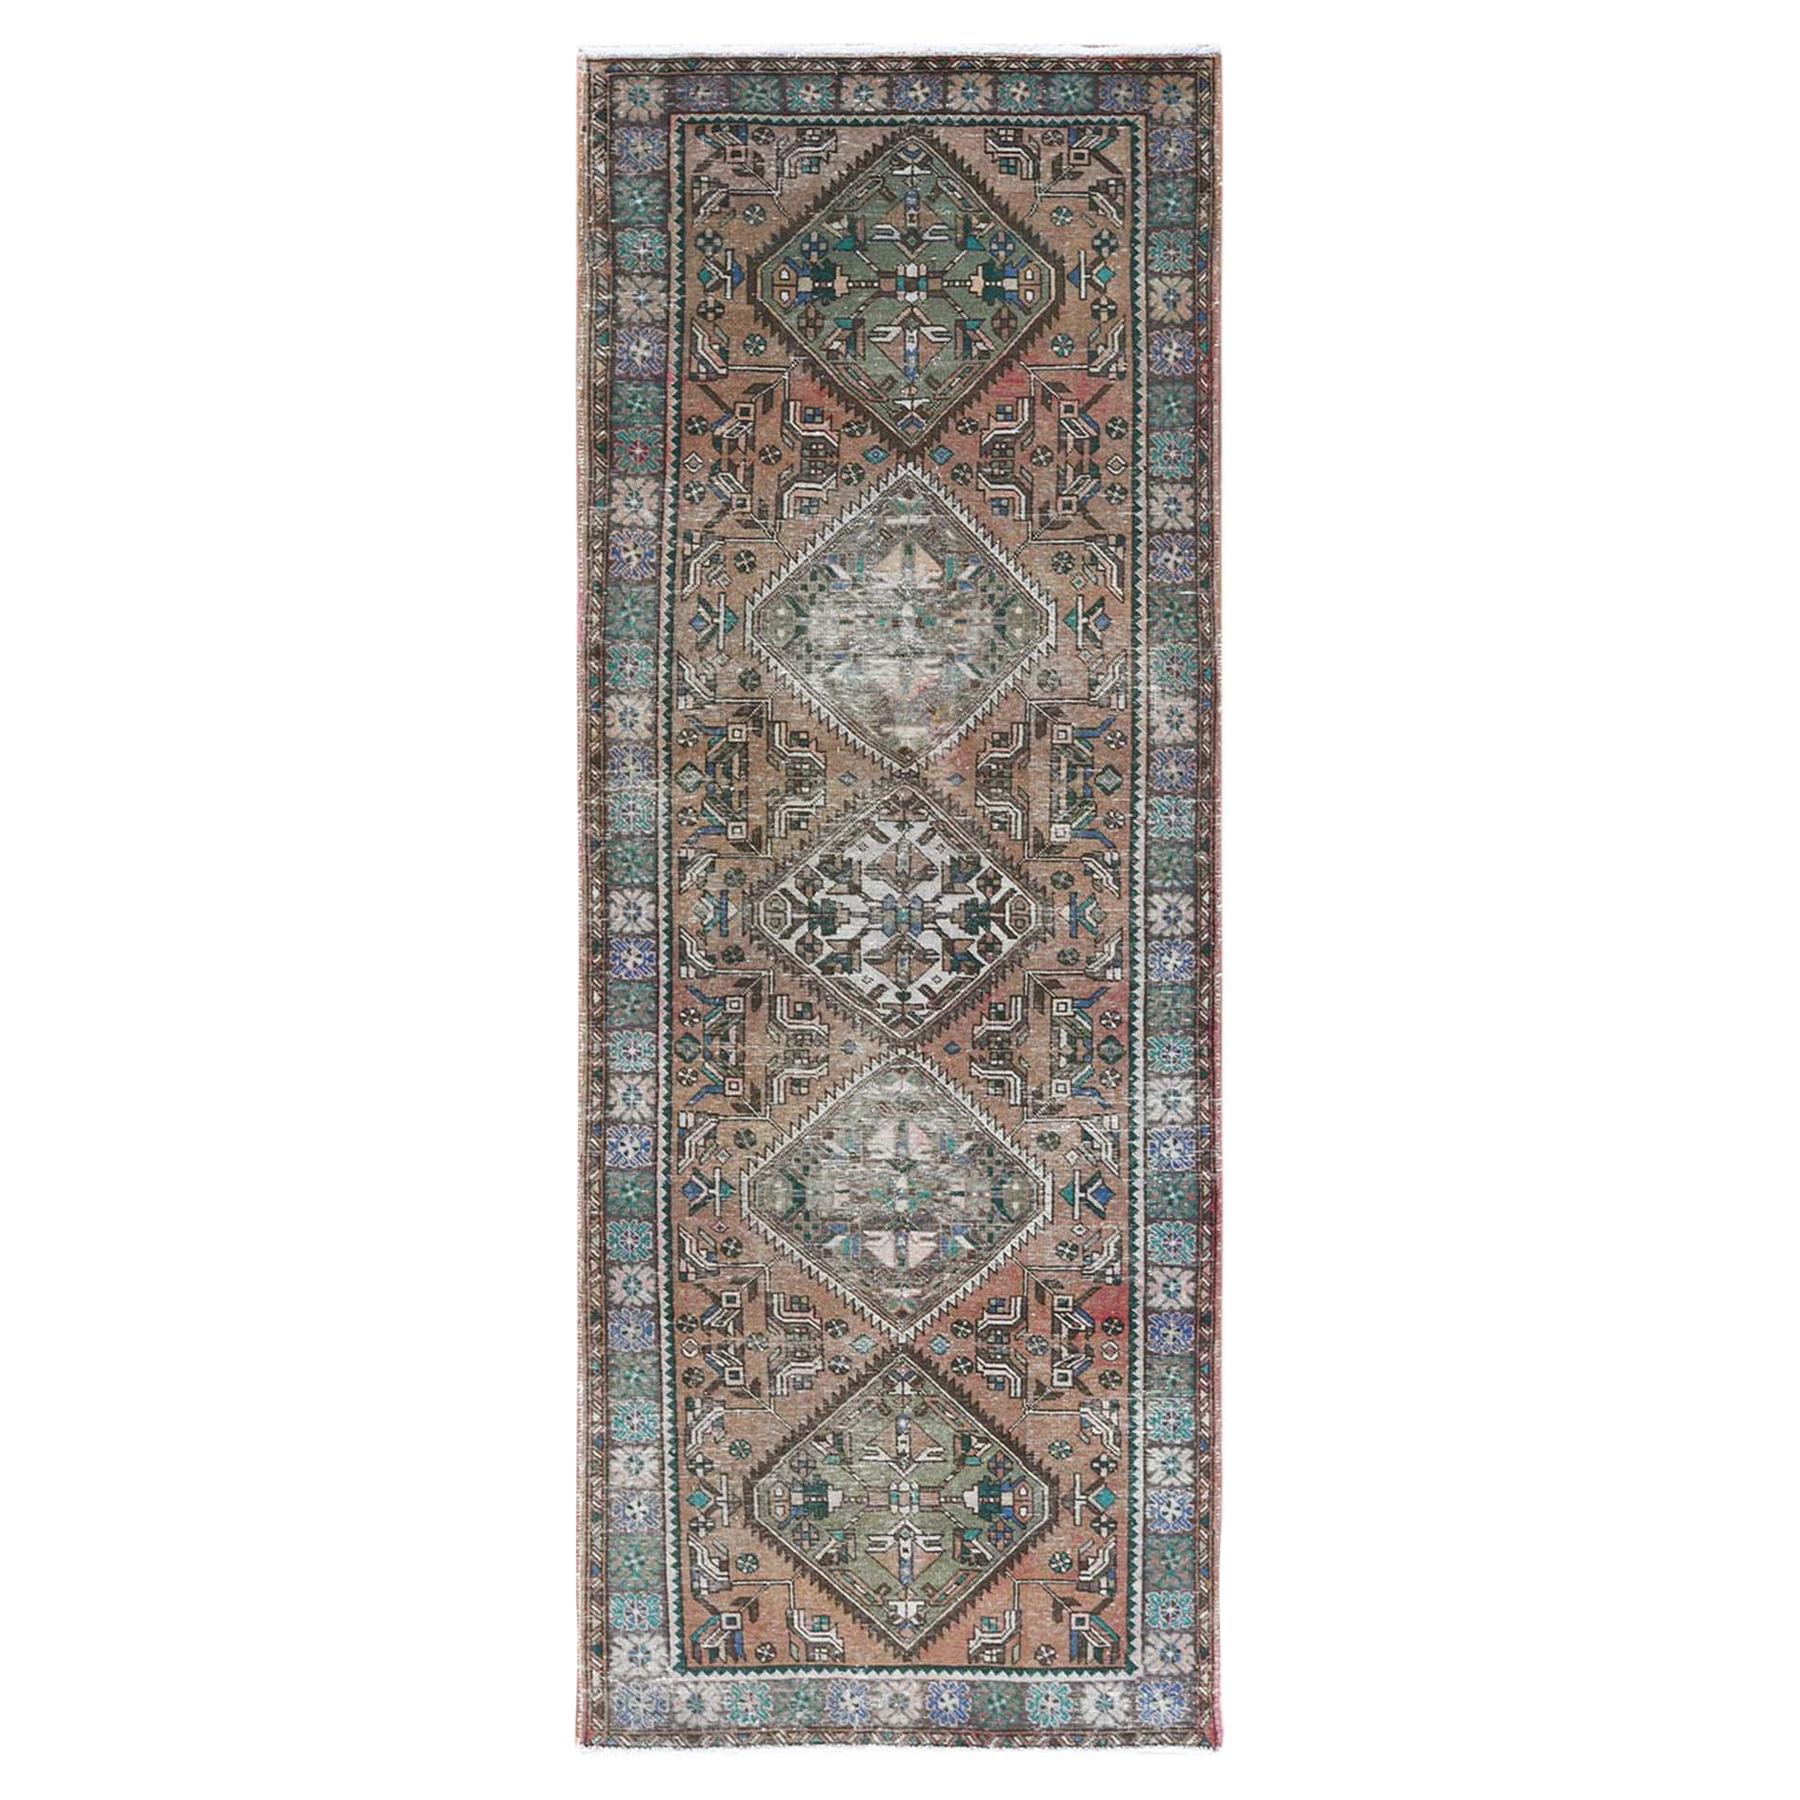 Old Hand Knotted Tan Color Northwest Persian Serrated Medallion Worn Wool Rug For Sale